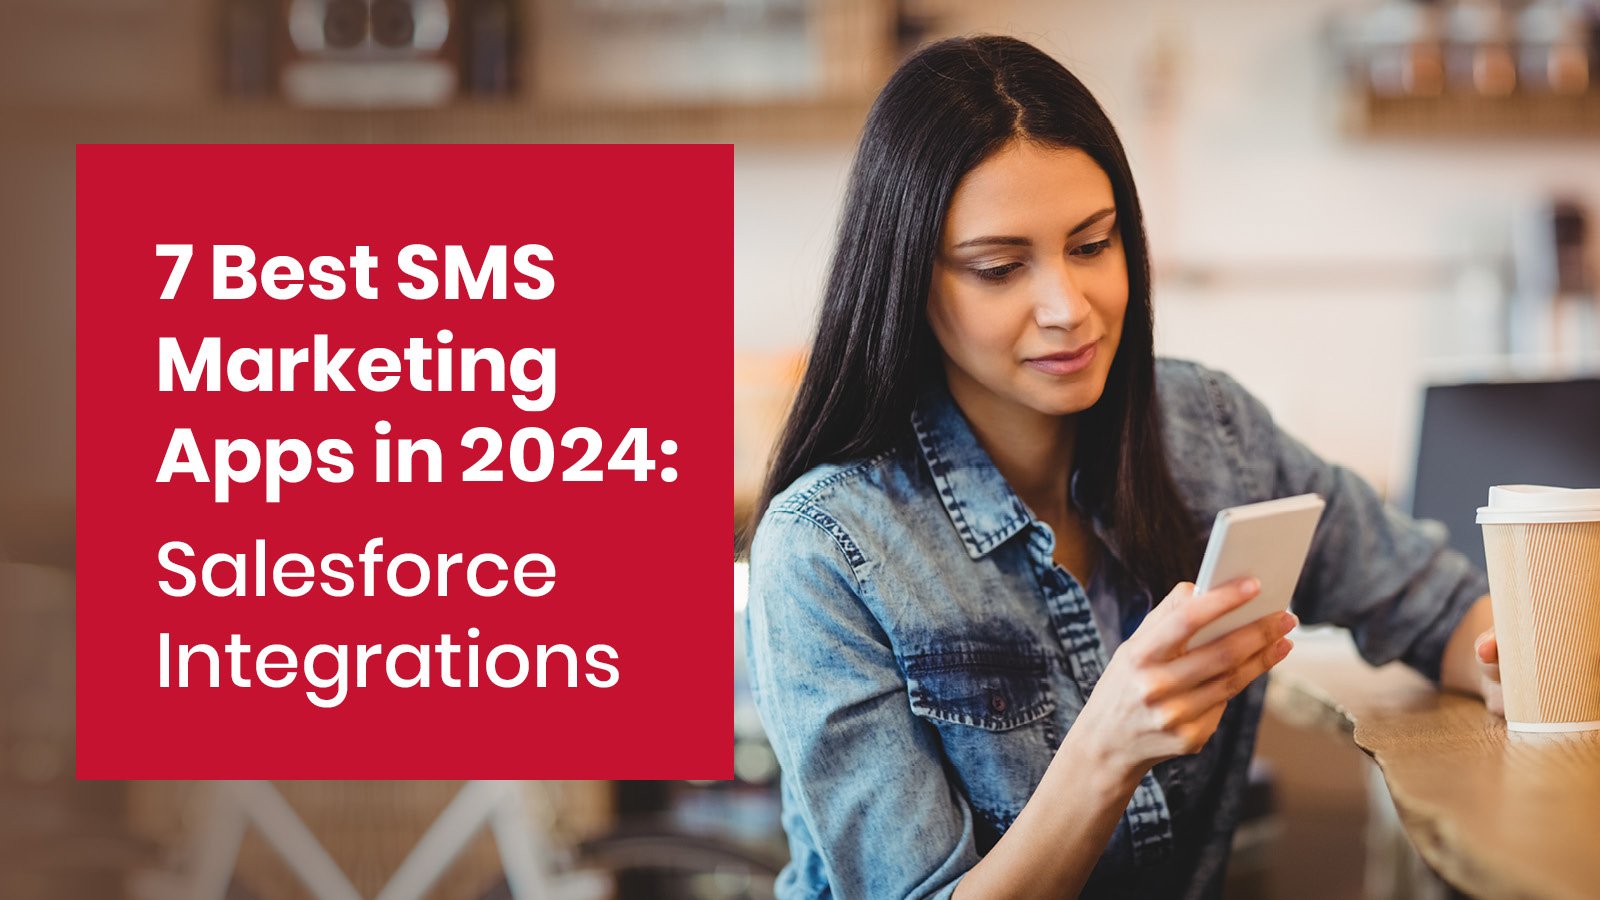 Check out the 7 best SMS marketing apps of 2024 in this article.